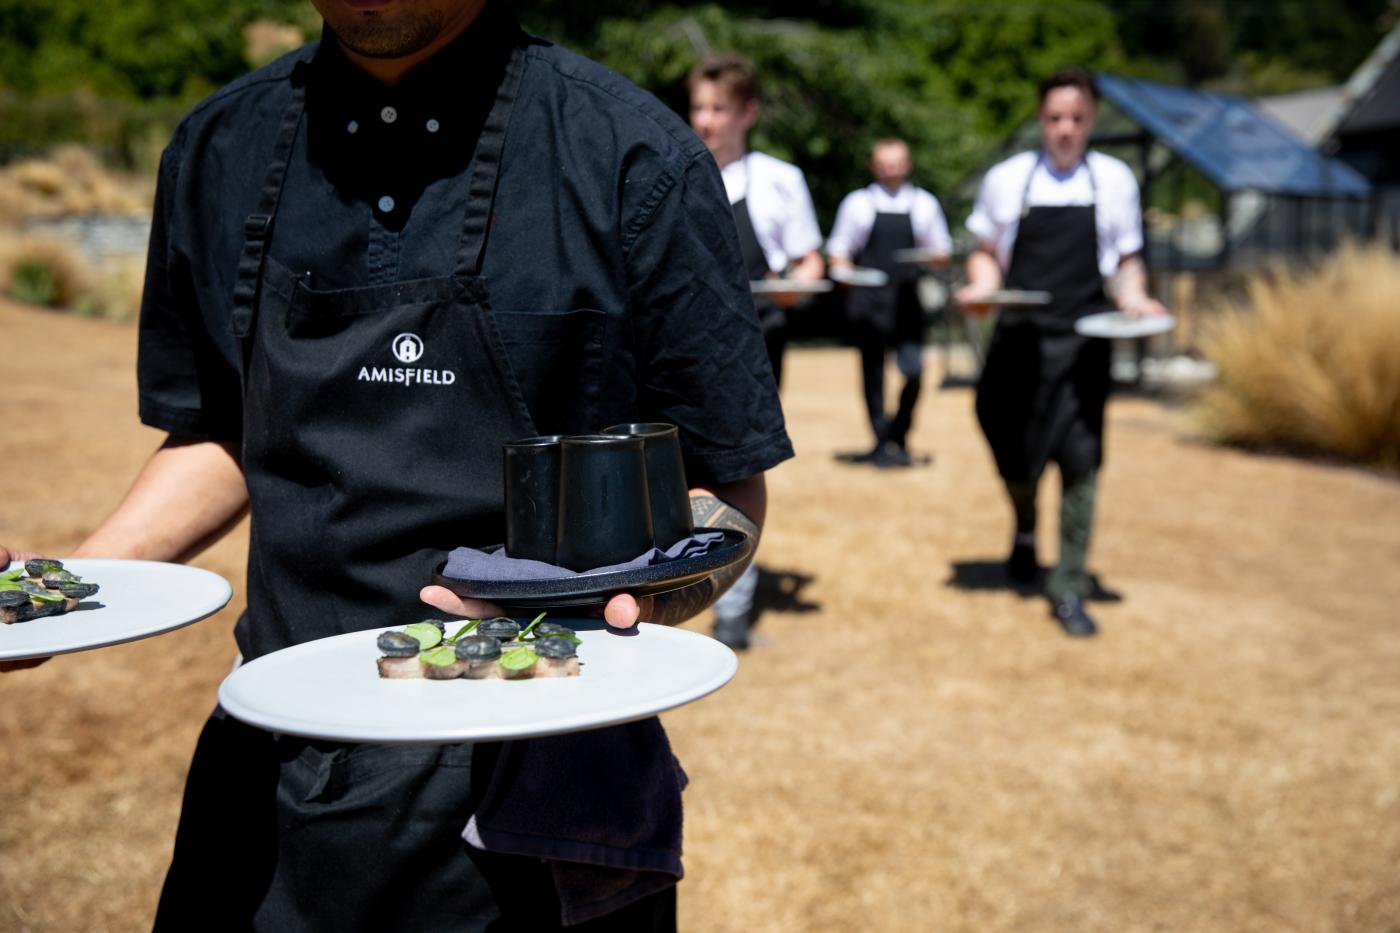 Waiter carrying out plates of food